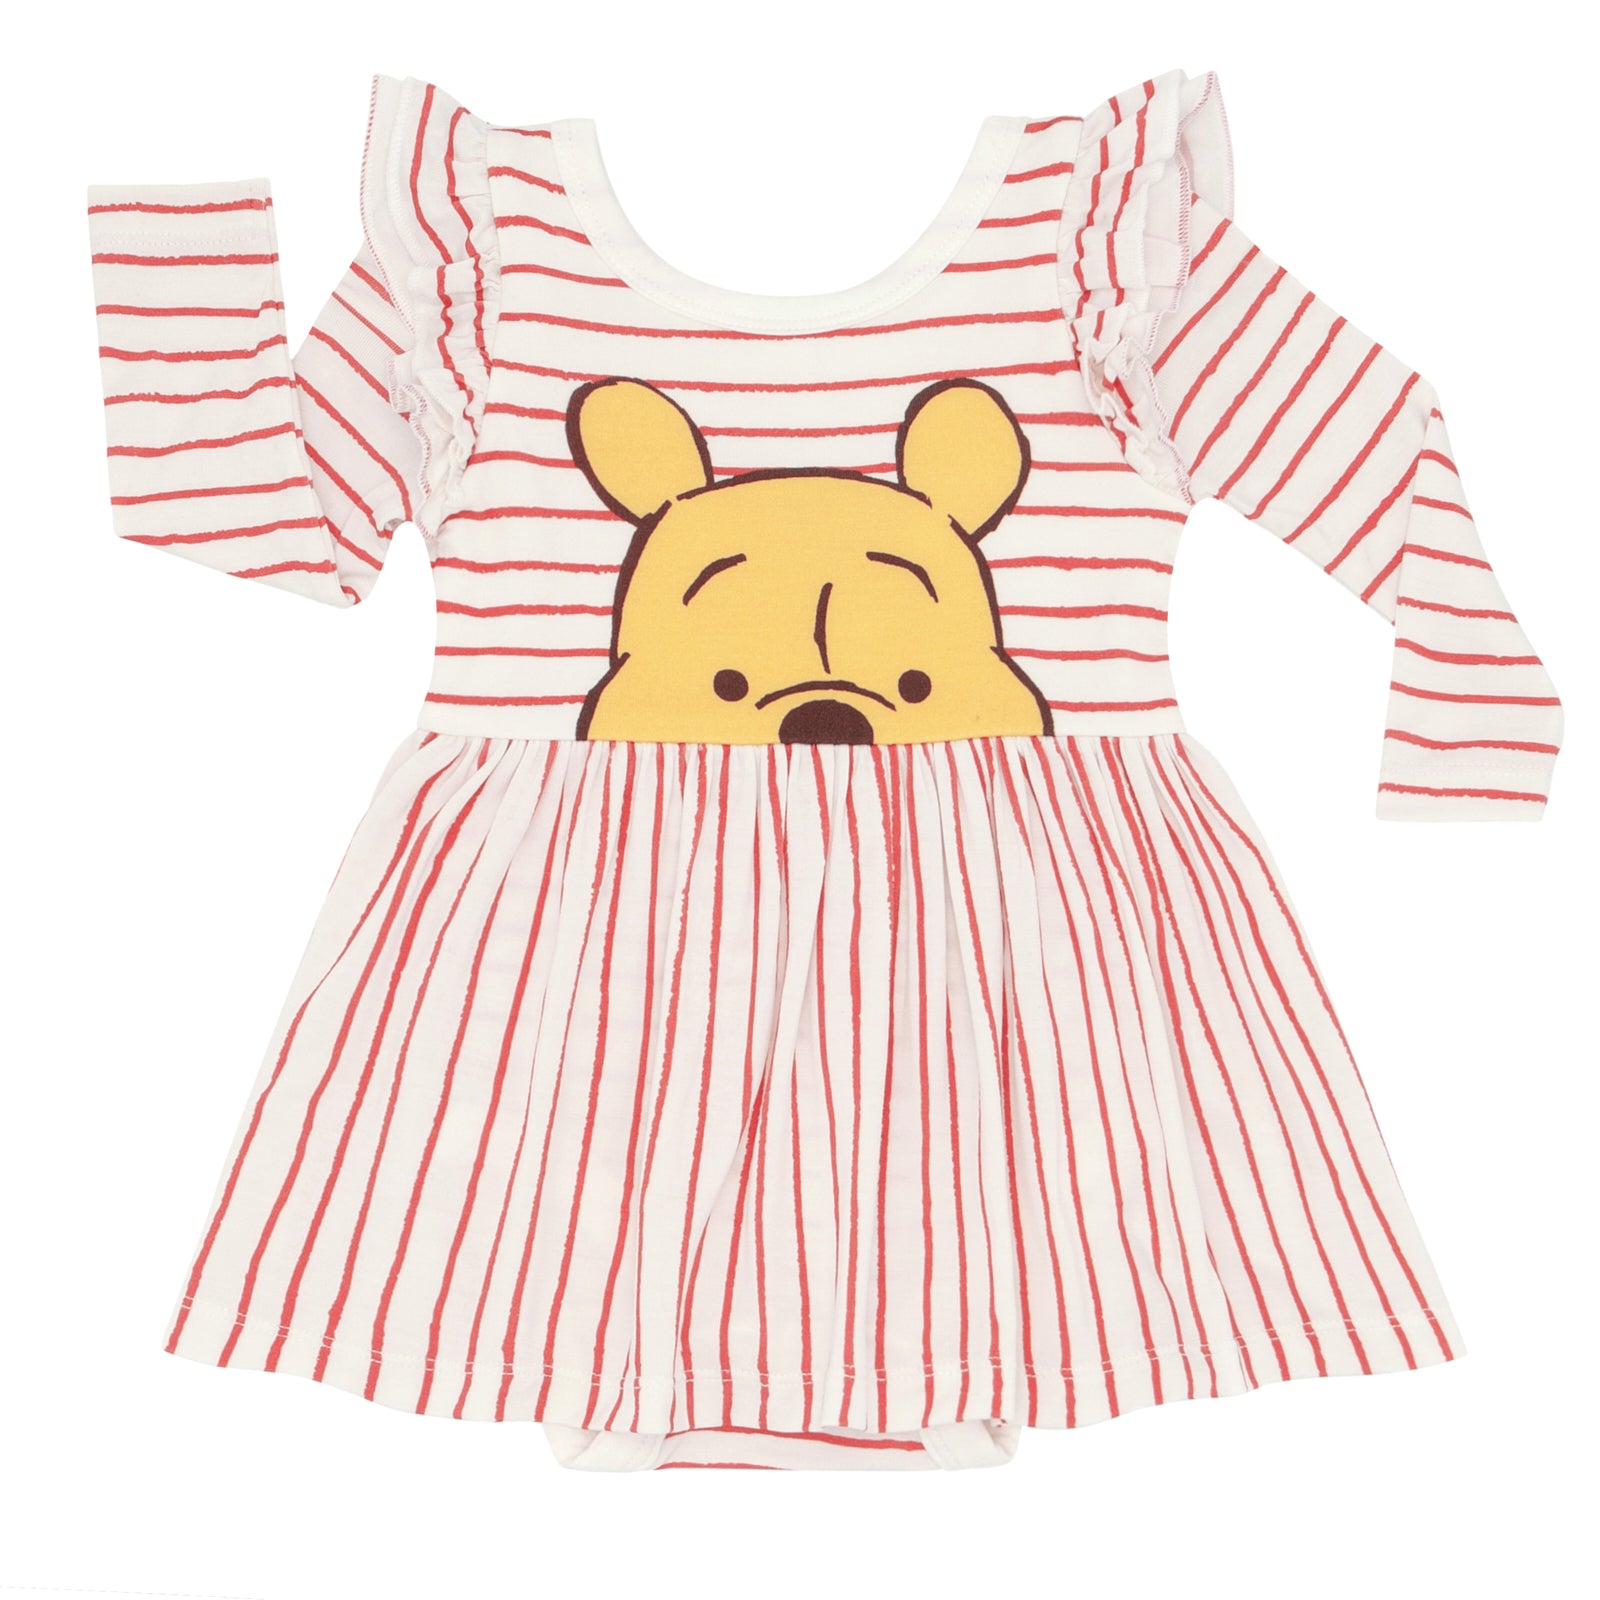 Flat lay image of a Disney Winnie the Pooh flutter skater dress with bodysuit